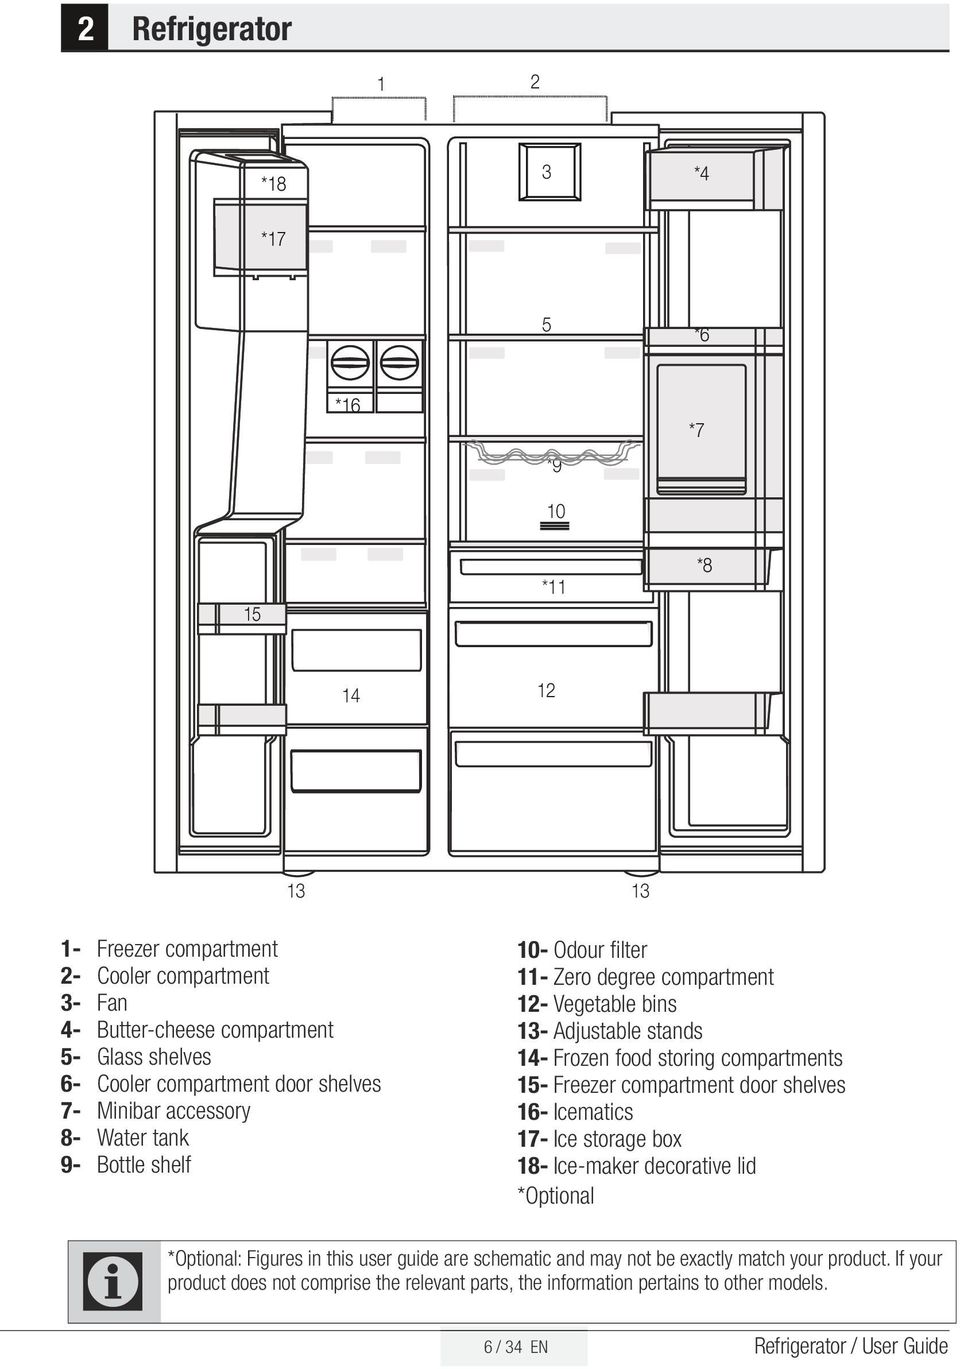 food storing compartments 15- Freezer compartment door shelves 16- Icematics 17- Ice storage box 18- Ice-maker decorative lid *Optional C *Optional: Figures in this user guide are